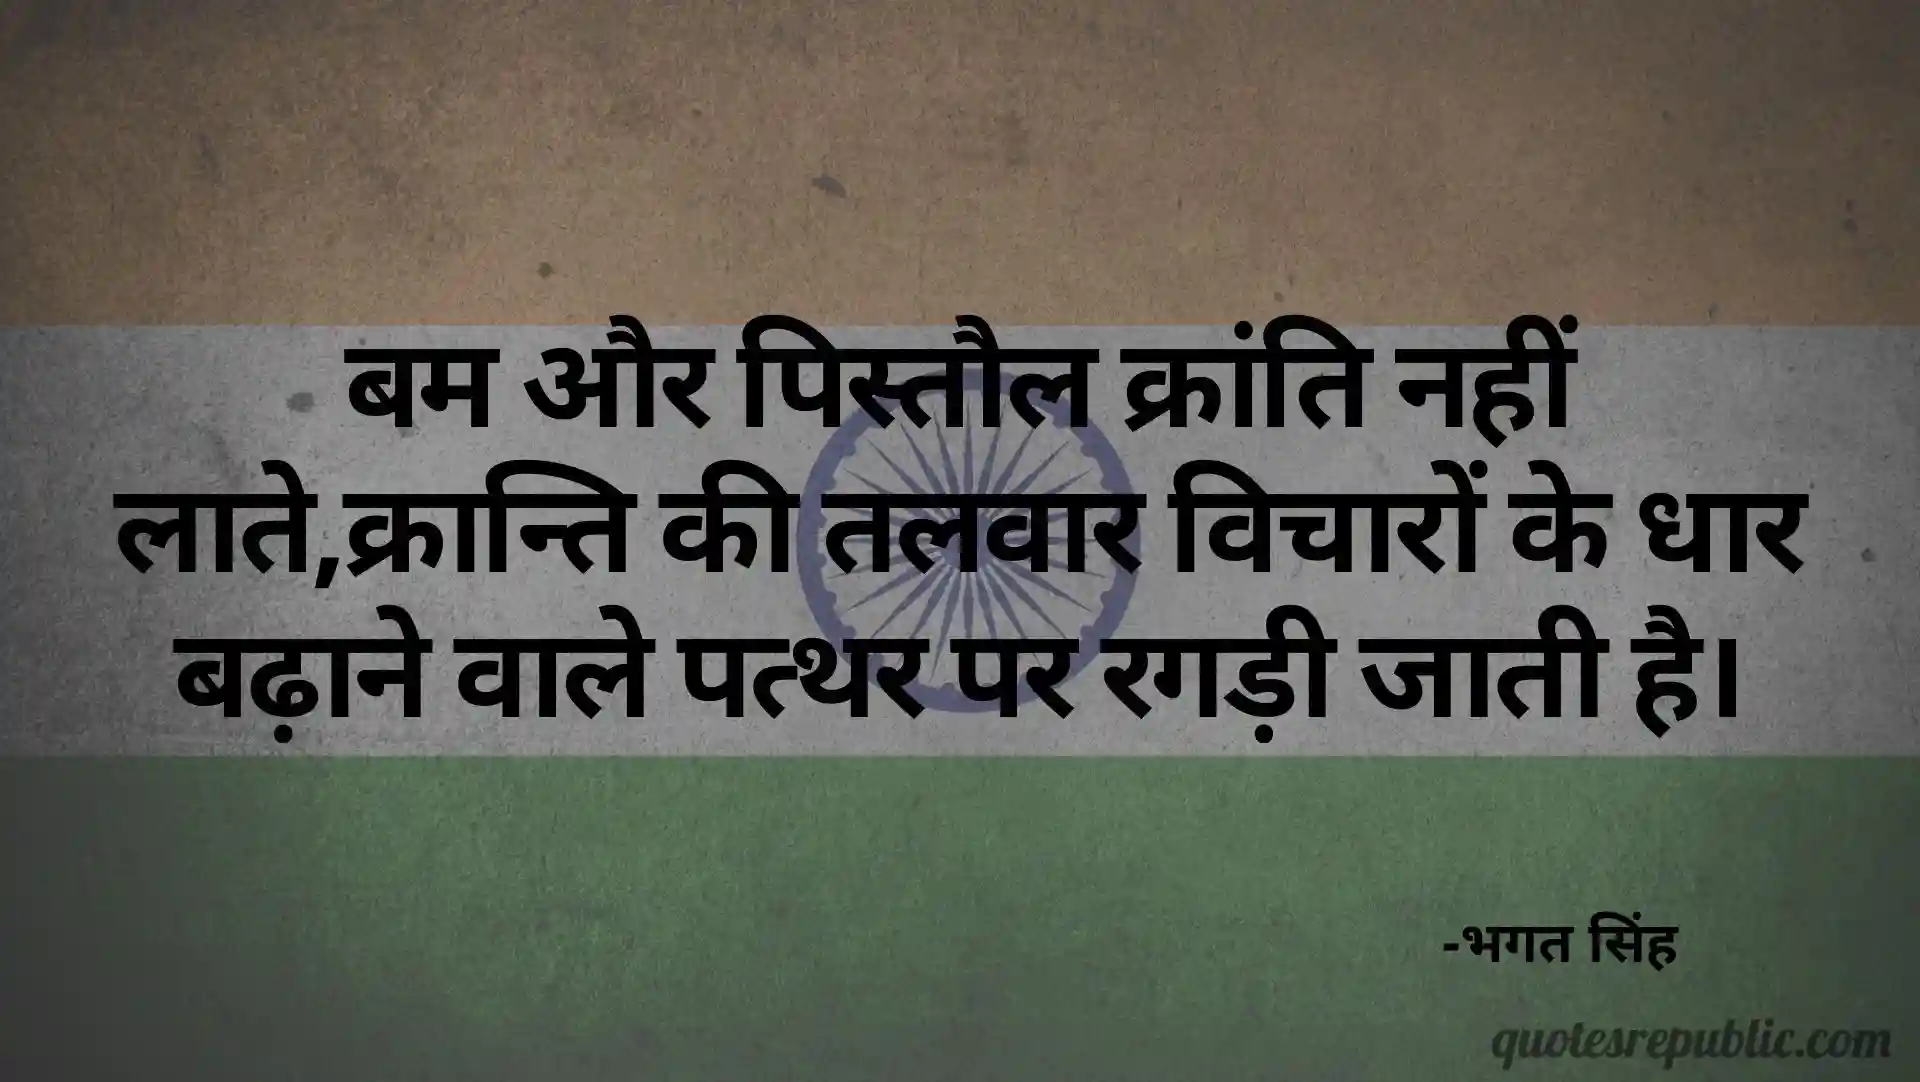 Independence Day Quotes In Hindi